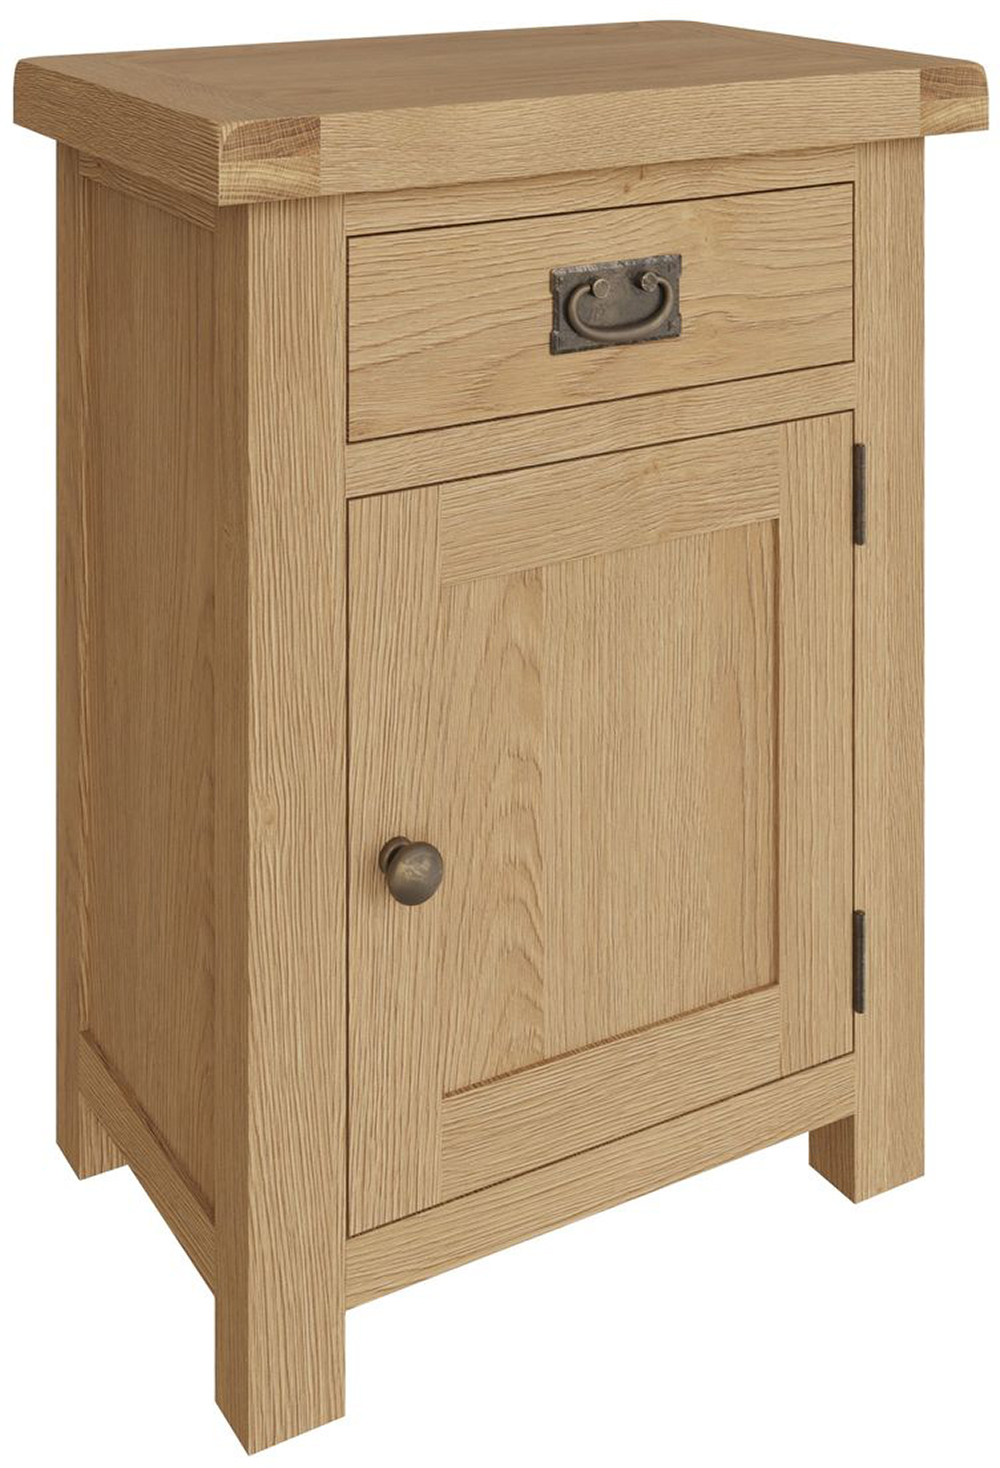 Kettle Interiors CO Small Cupboard